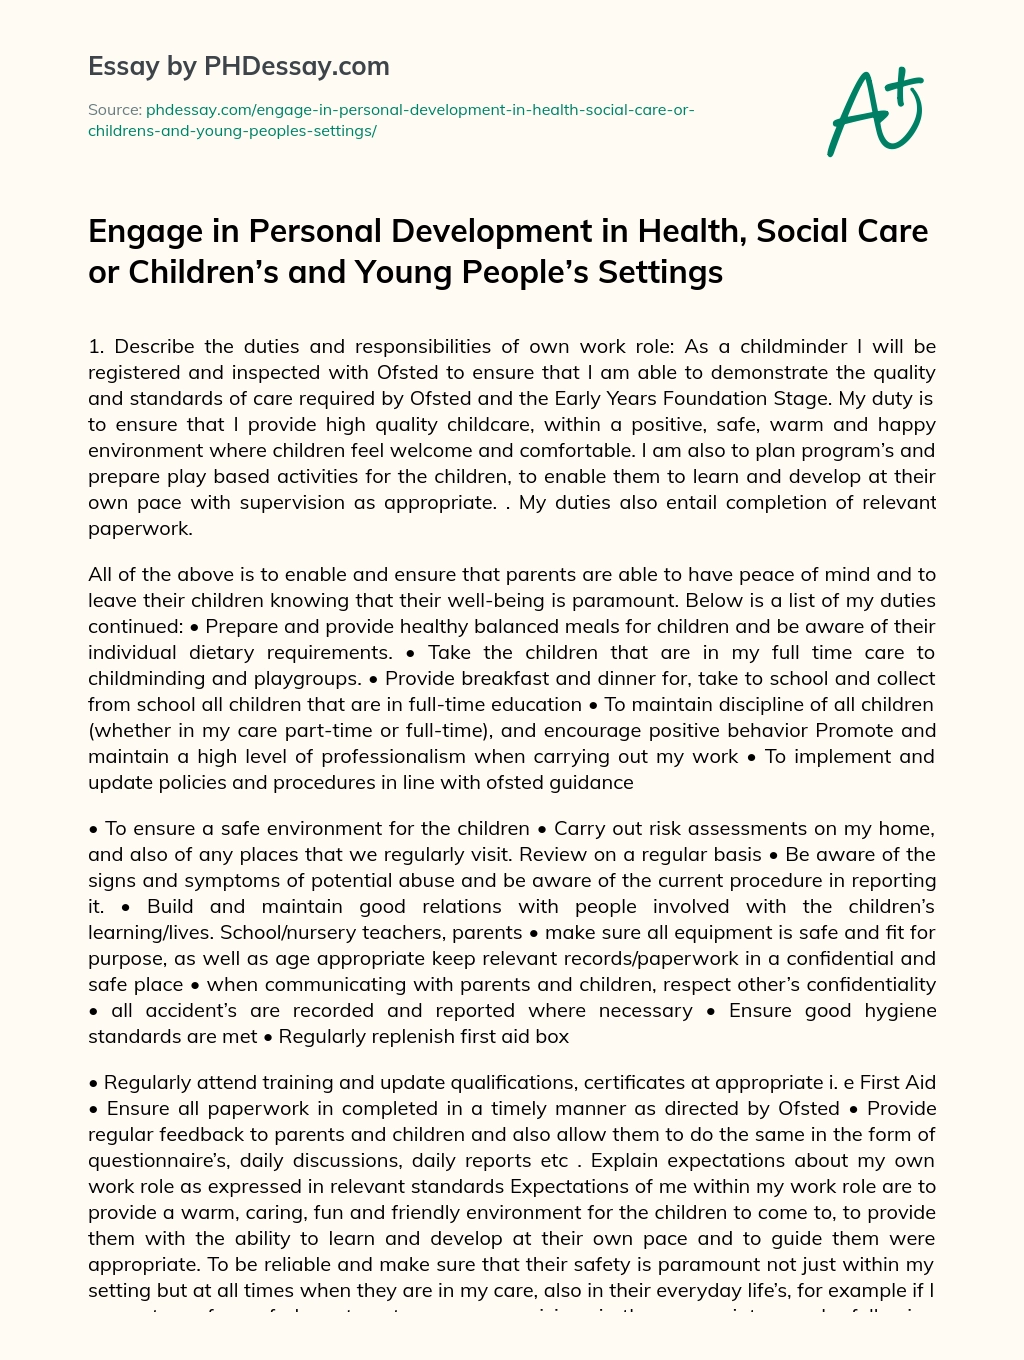 Engage in Personal Development in Health, Social Care or Children’s and Young People’s Settings essay